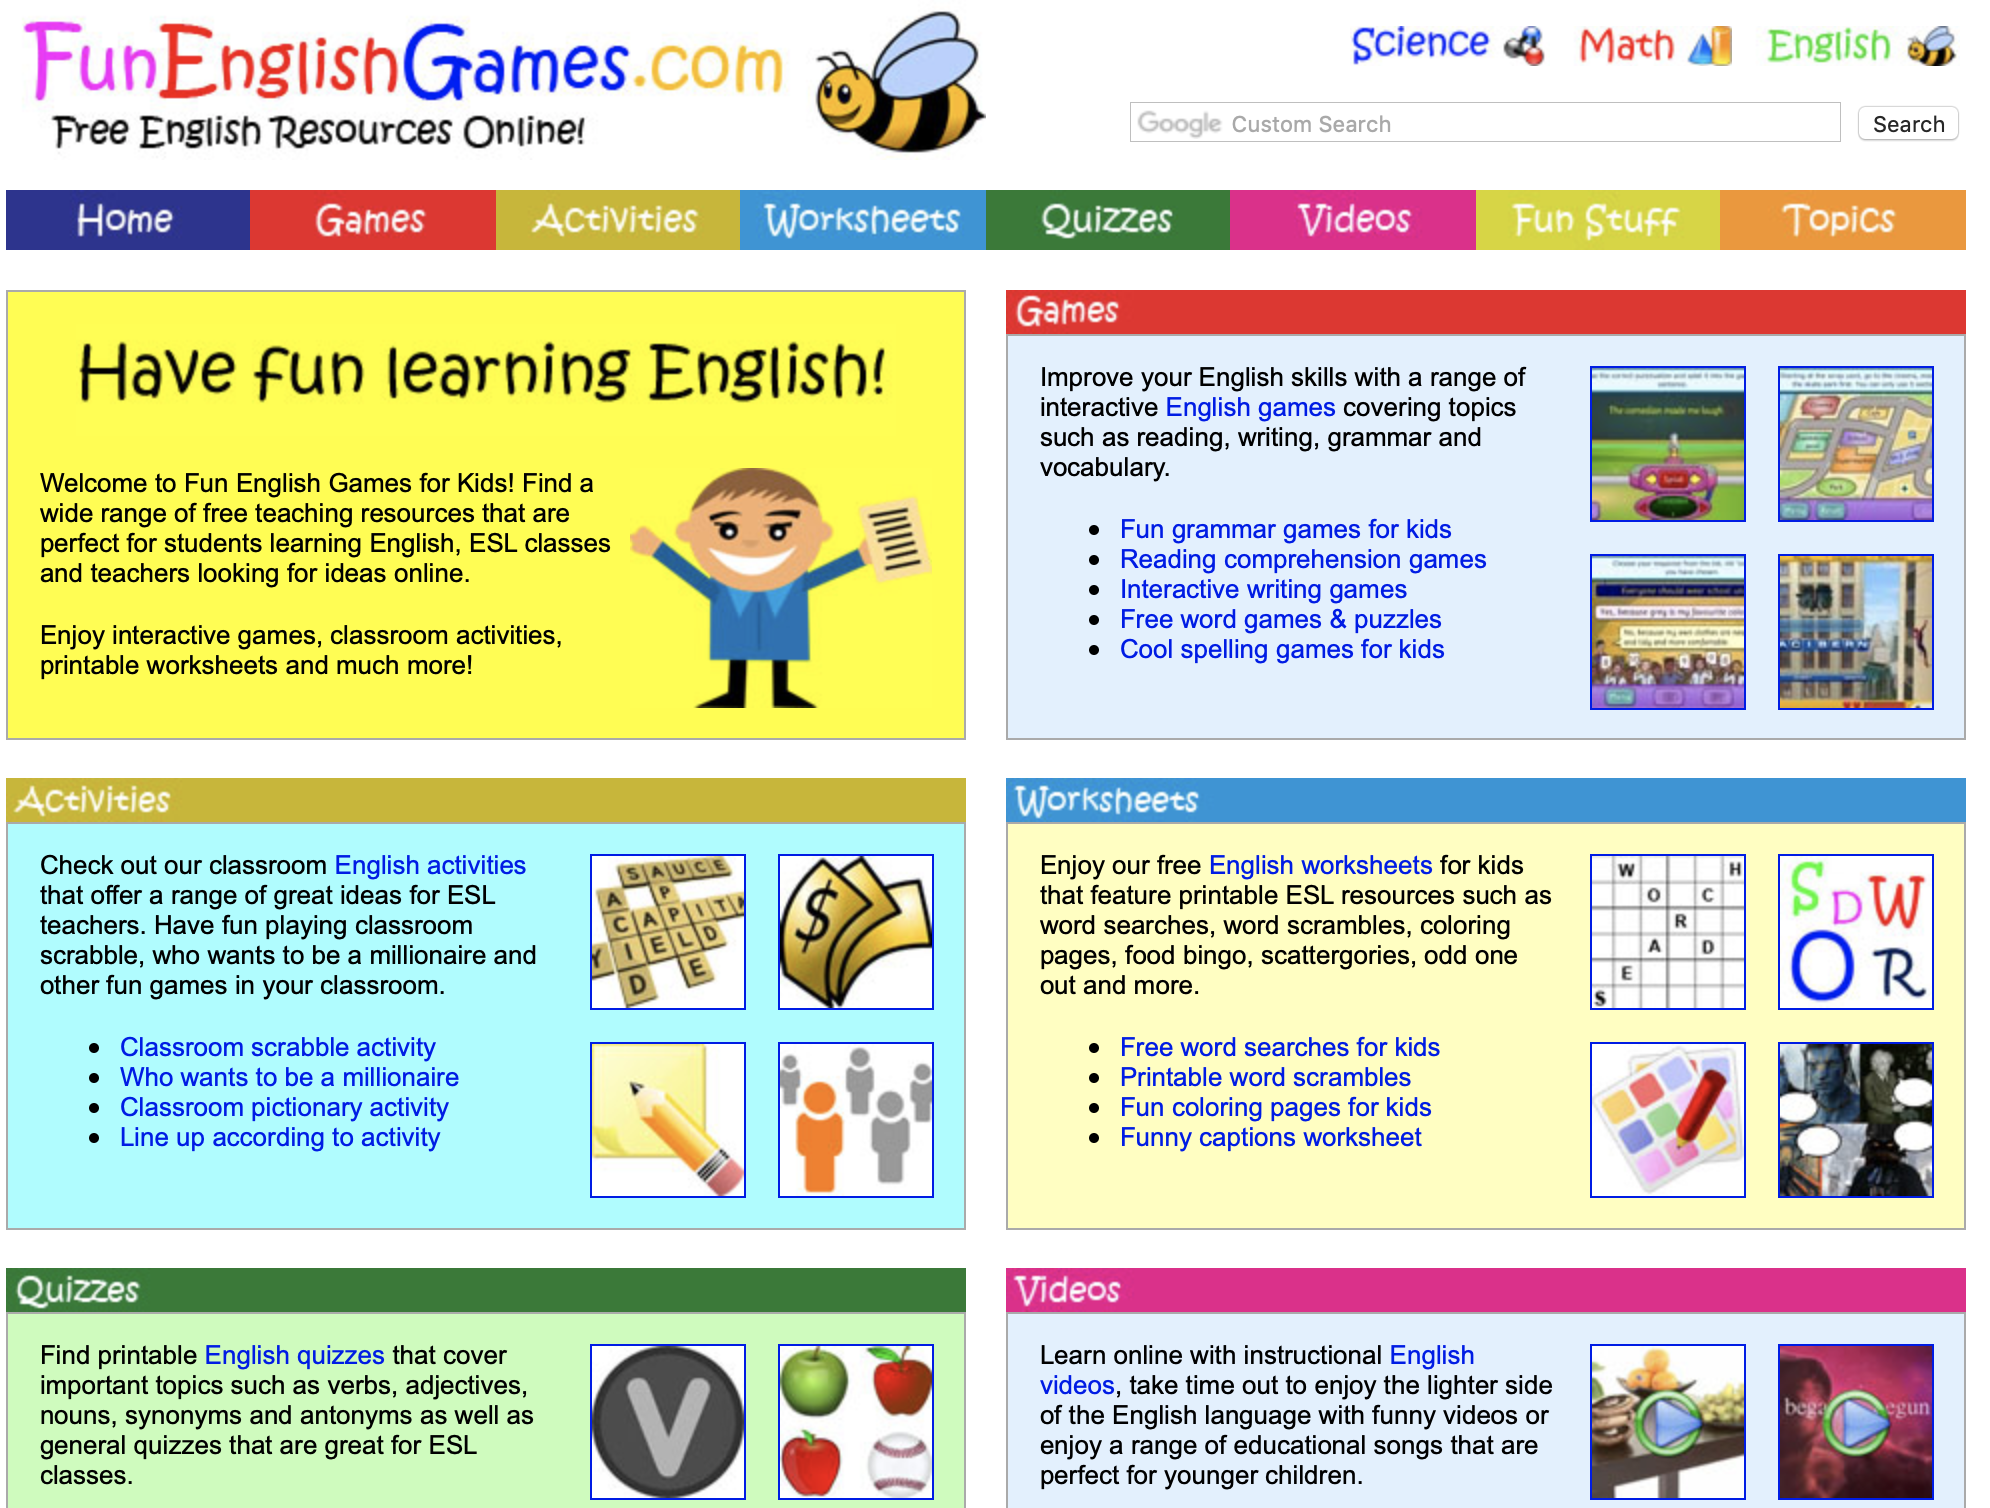 Games to learn to be. Funny English game. Инглиш геймс. Fun English games. English games for Kids.